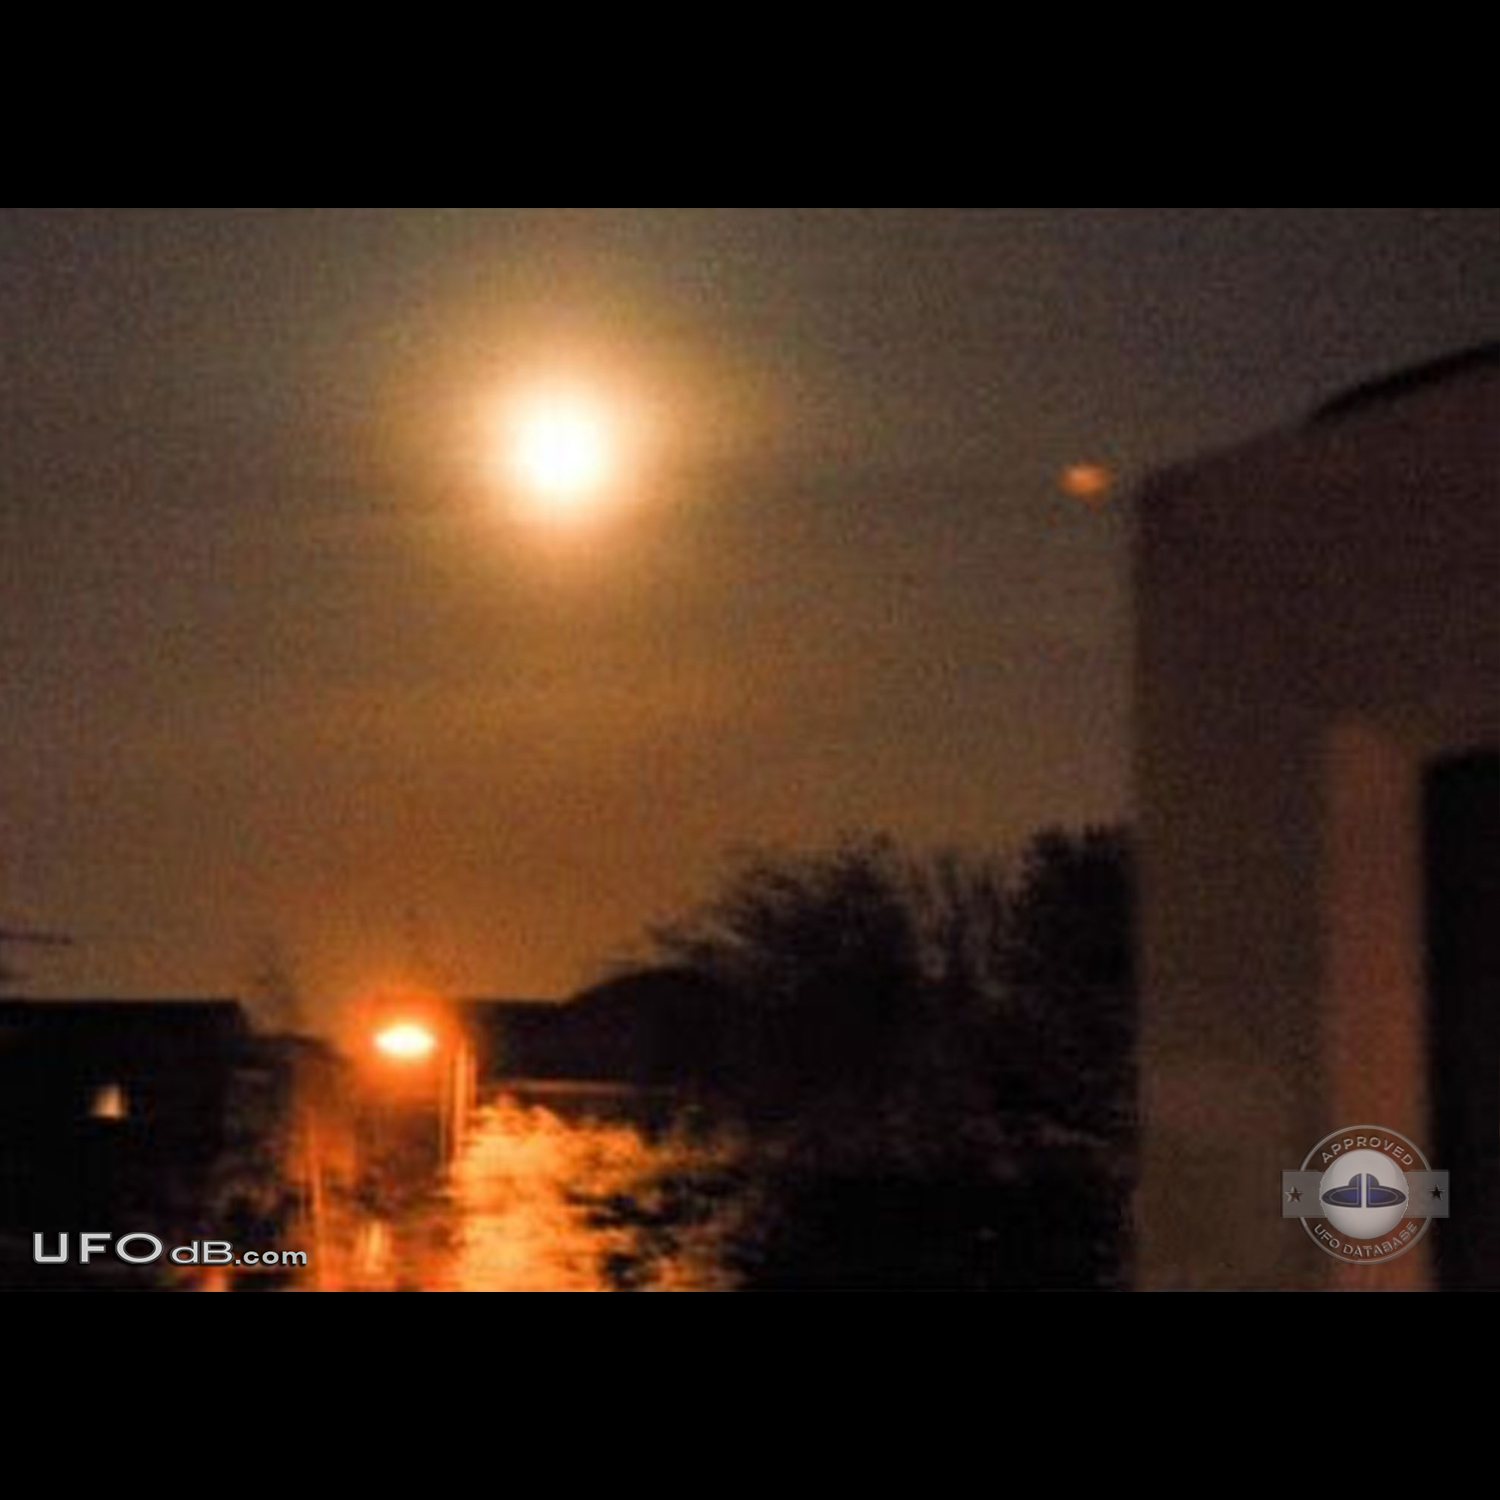 Glowing Orange Sphere UFO caught on picture in Sheffield UK in 2012 UFO Picture #485-2